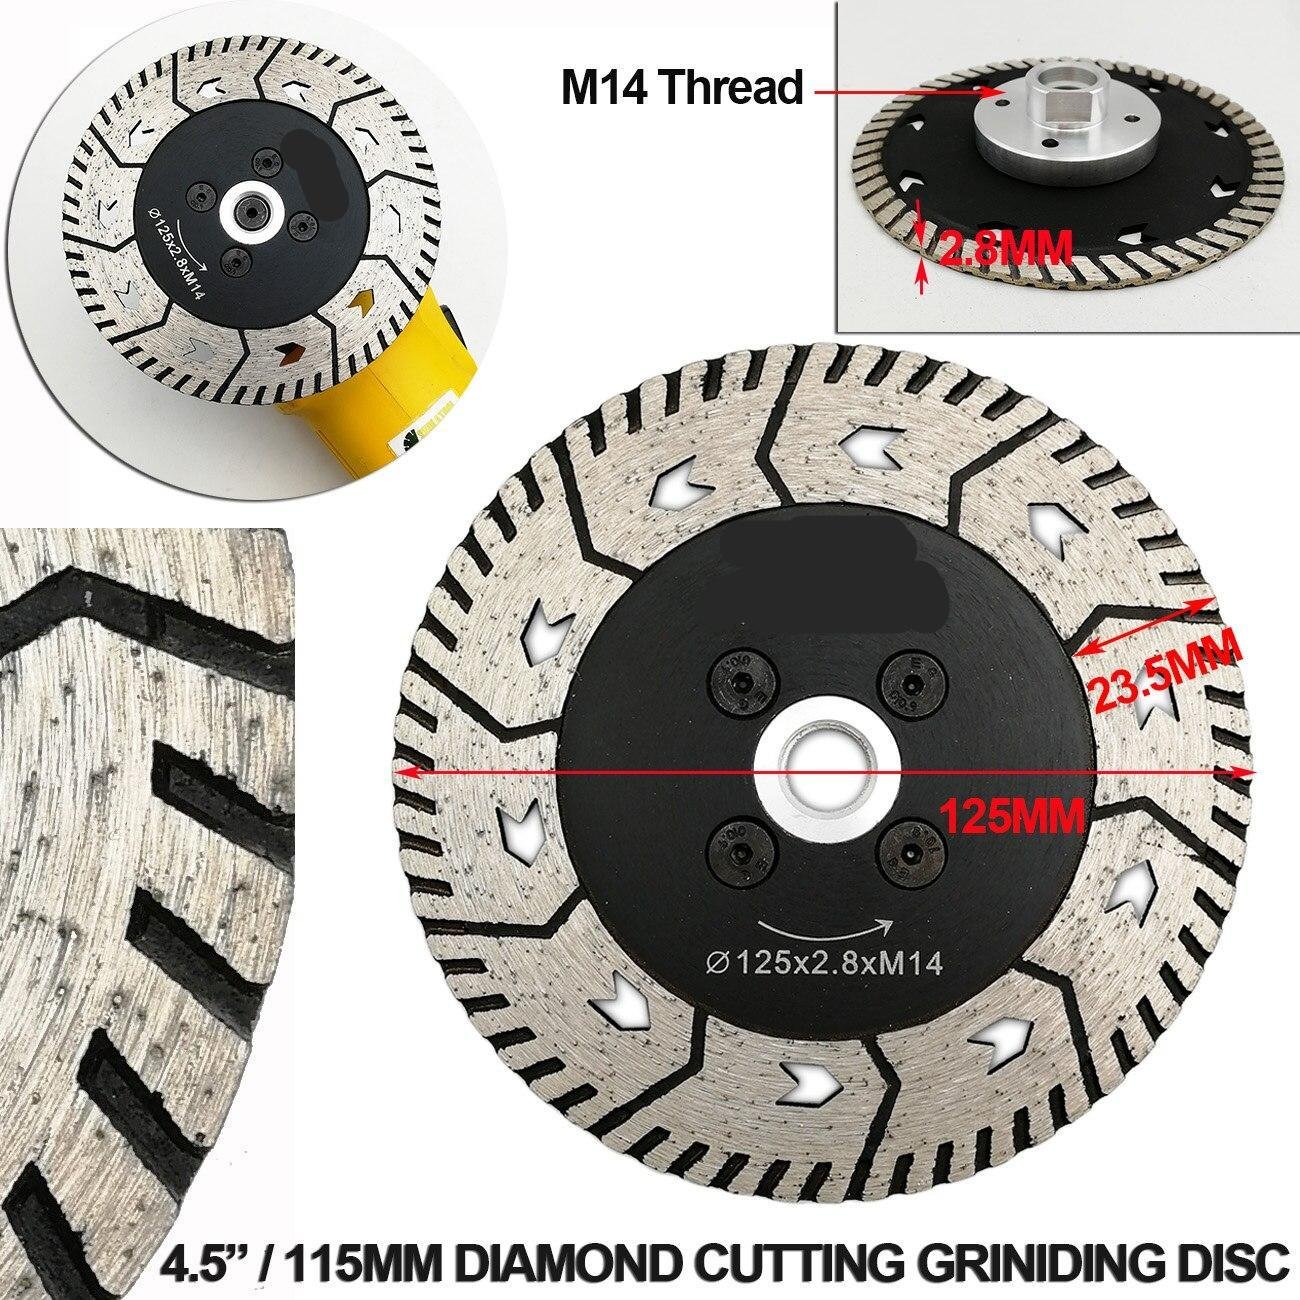 7" Dual Saw Blade Diamond Grinding Cutting Disc for Granite Marble Details about   2pcs 180mm 